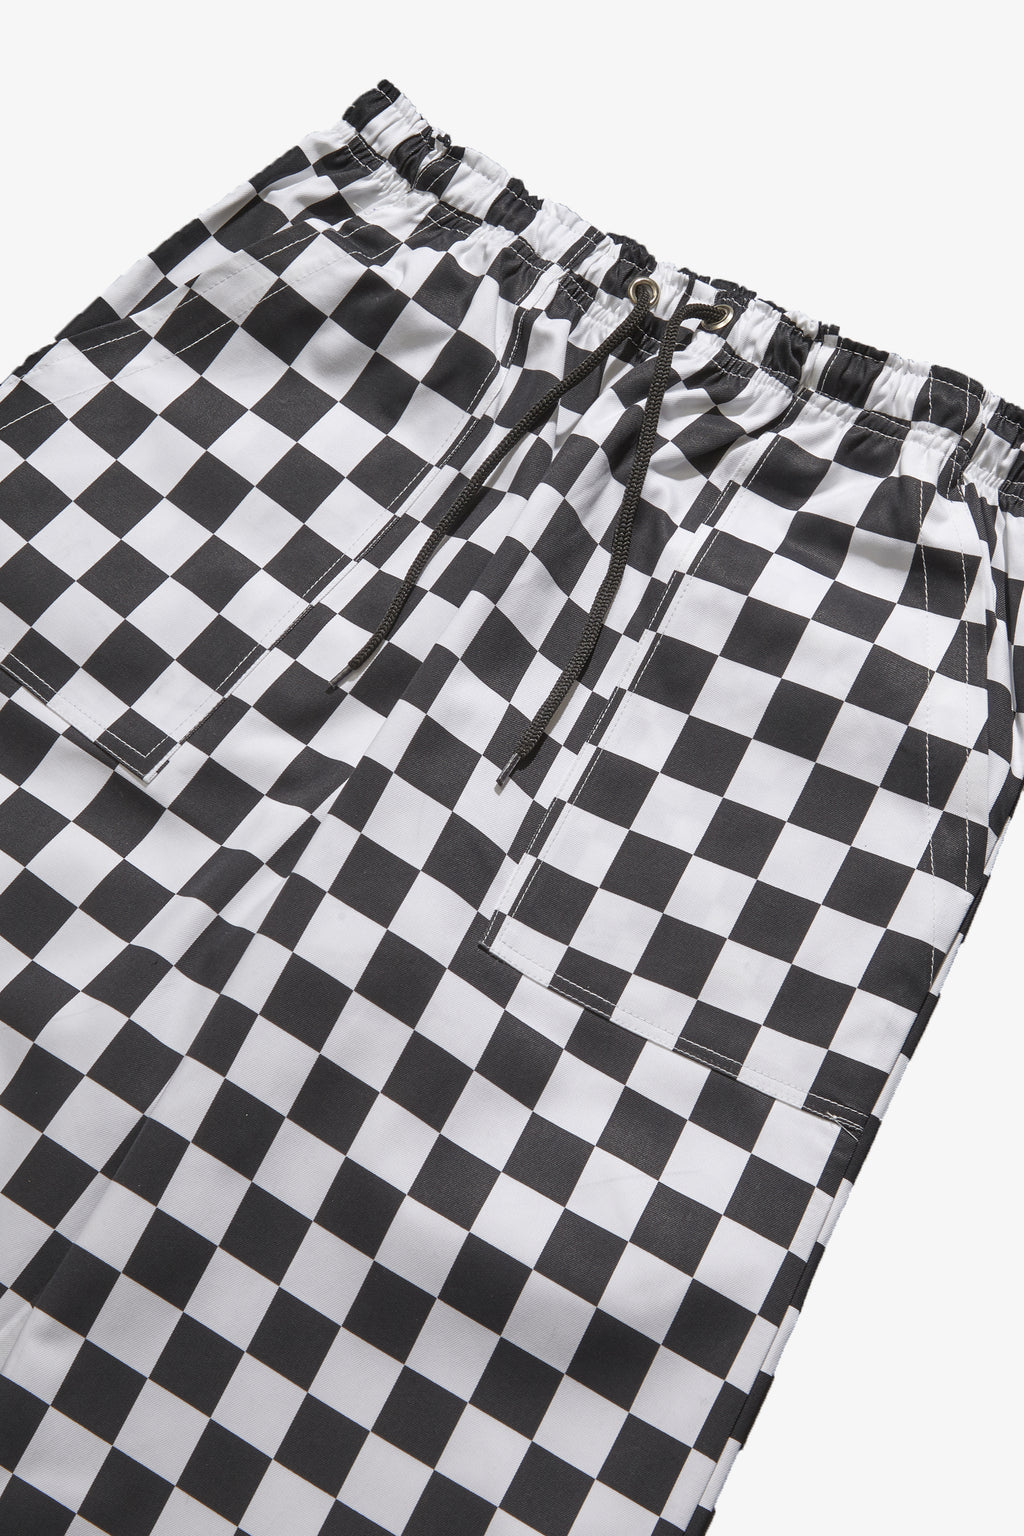 Service Works - Classic Chef Pants - Checkerboard